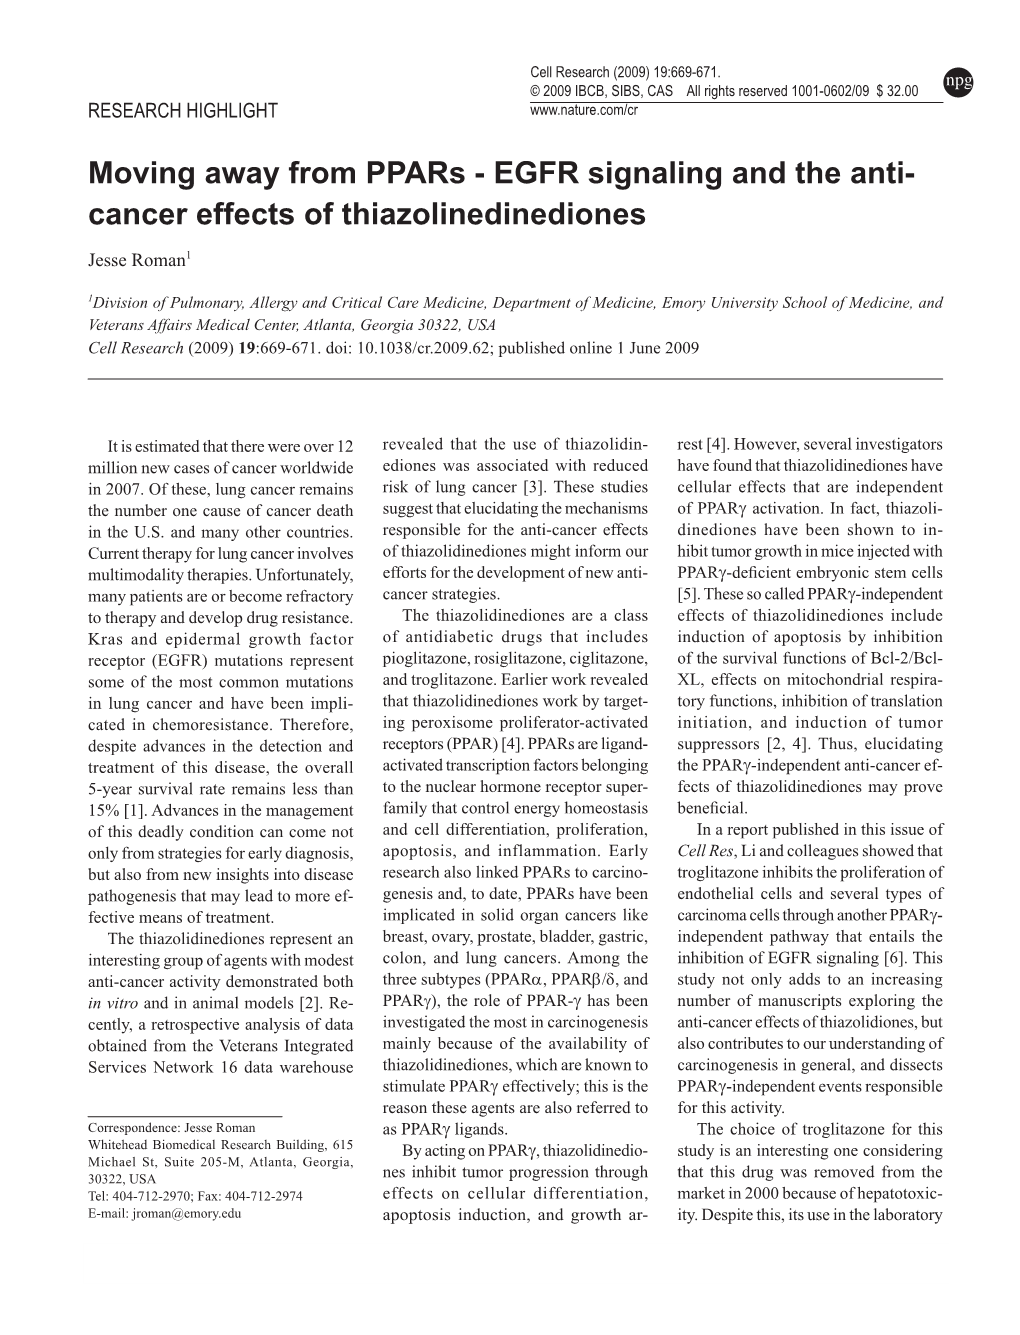 EGFR Signaling and the Anti- Cancer Effects of Thiazolinedinediones Jesse Roman1